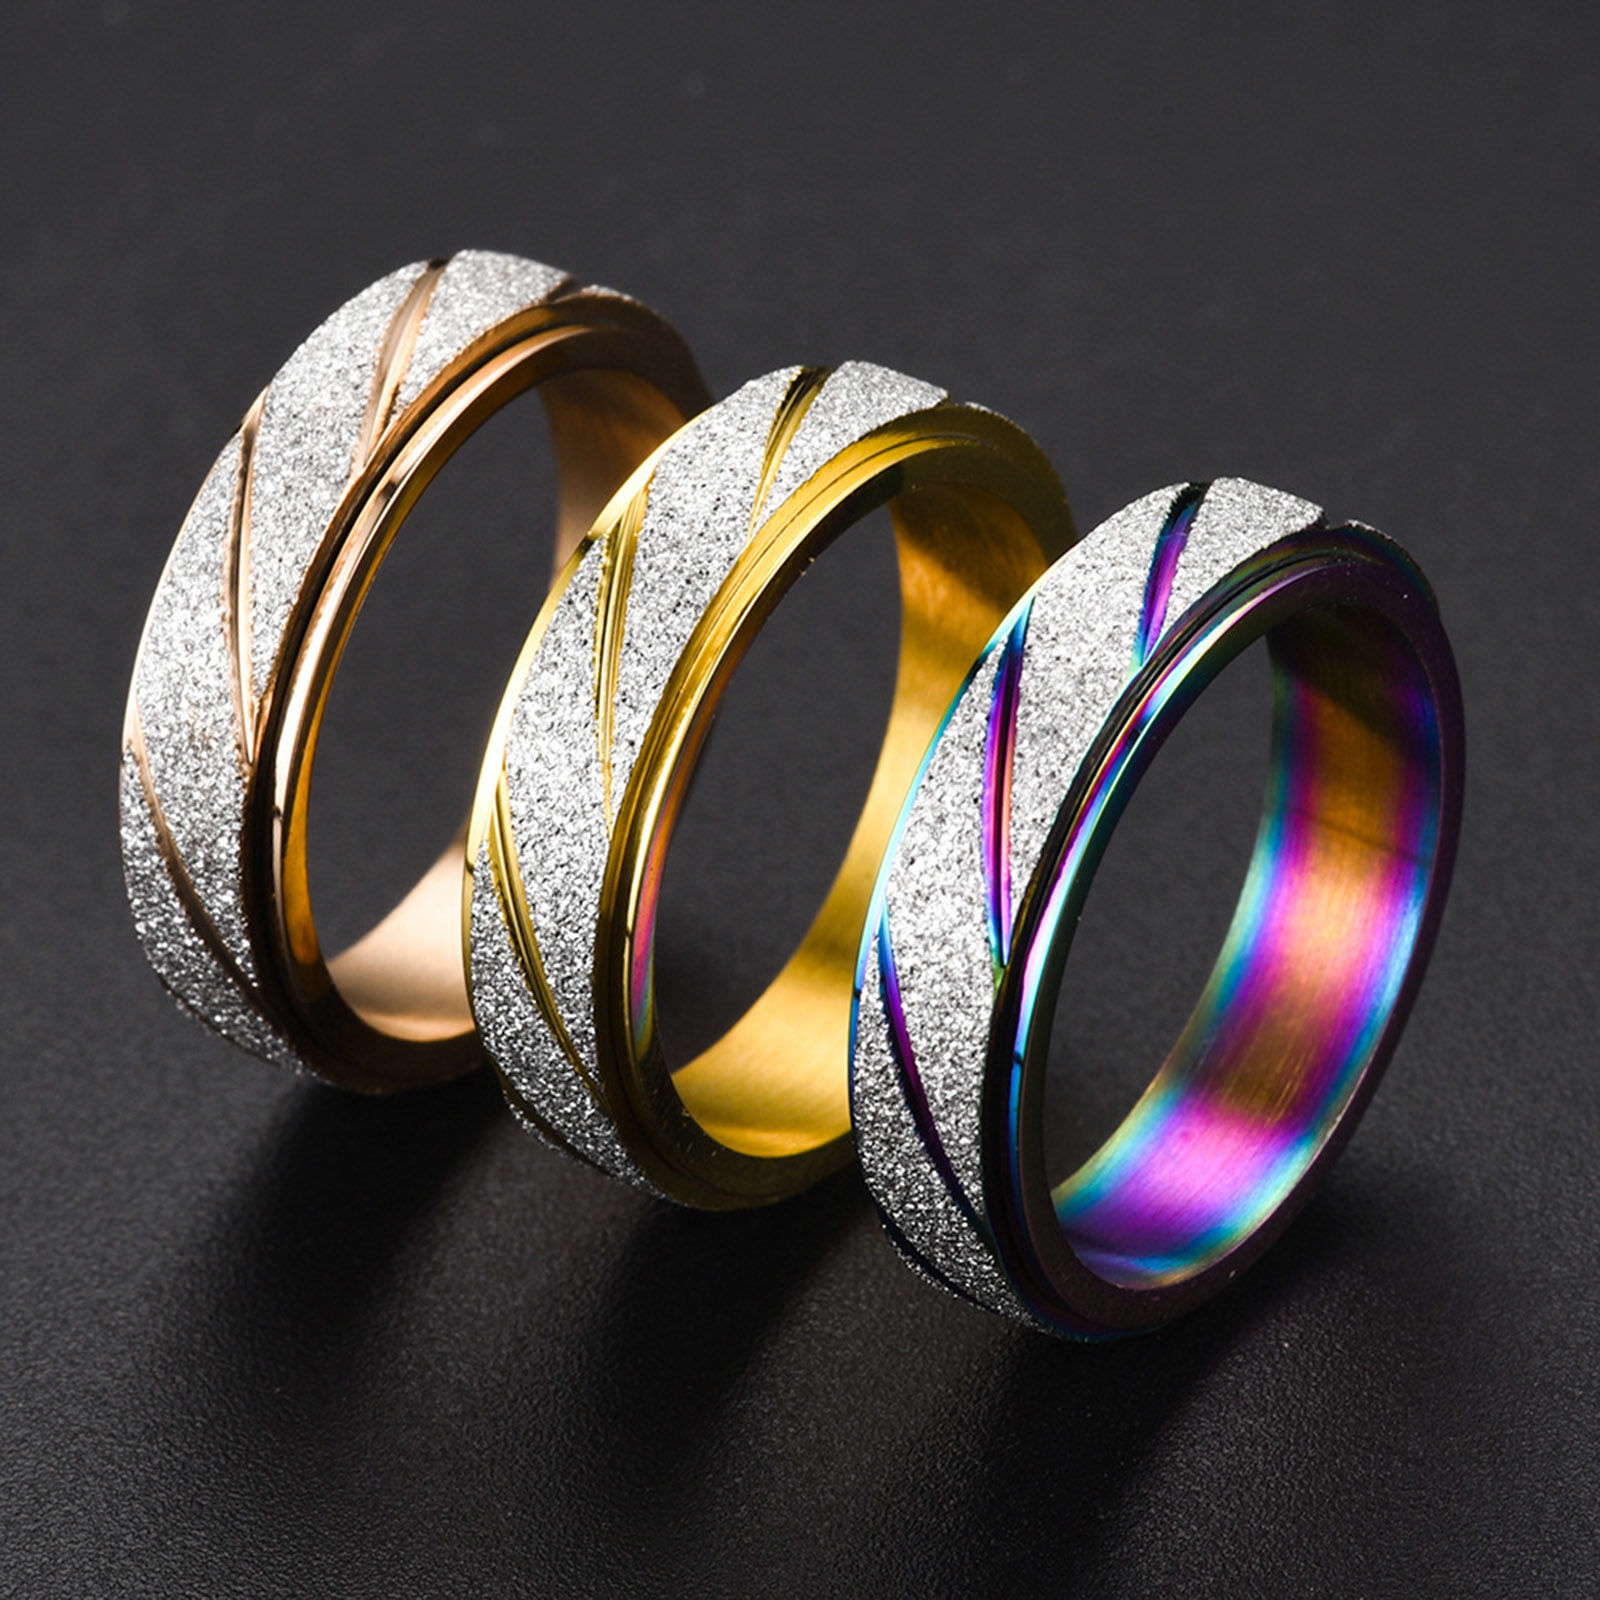 Picture of Stainless Steel Unadjustable Stress Relieving Anxiety Ring Fidget Spinner Rings Glitter Finish Rotatable Round